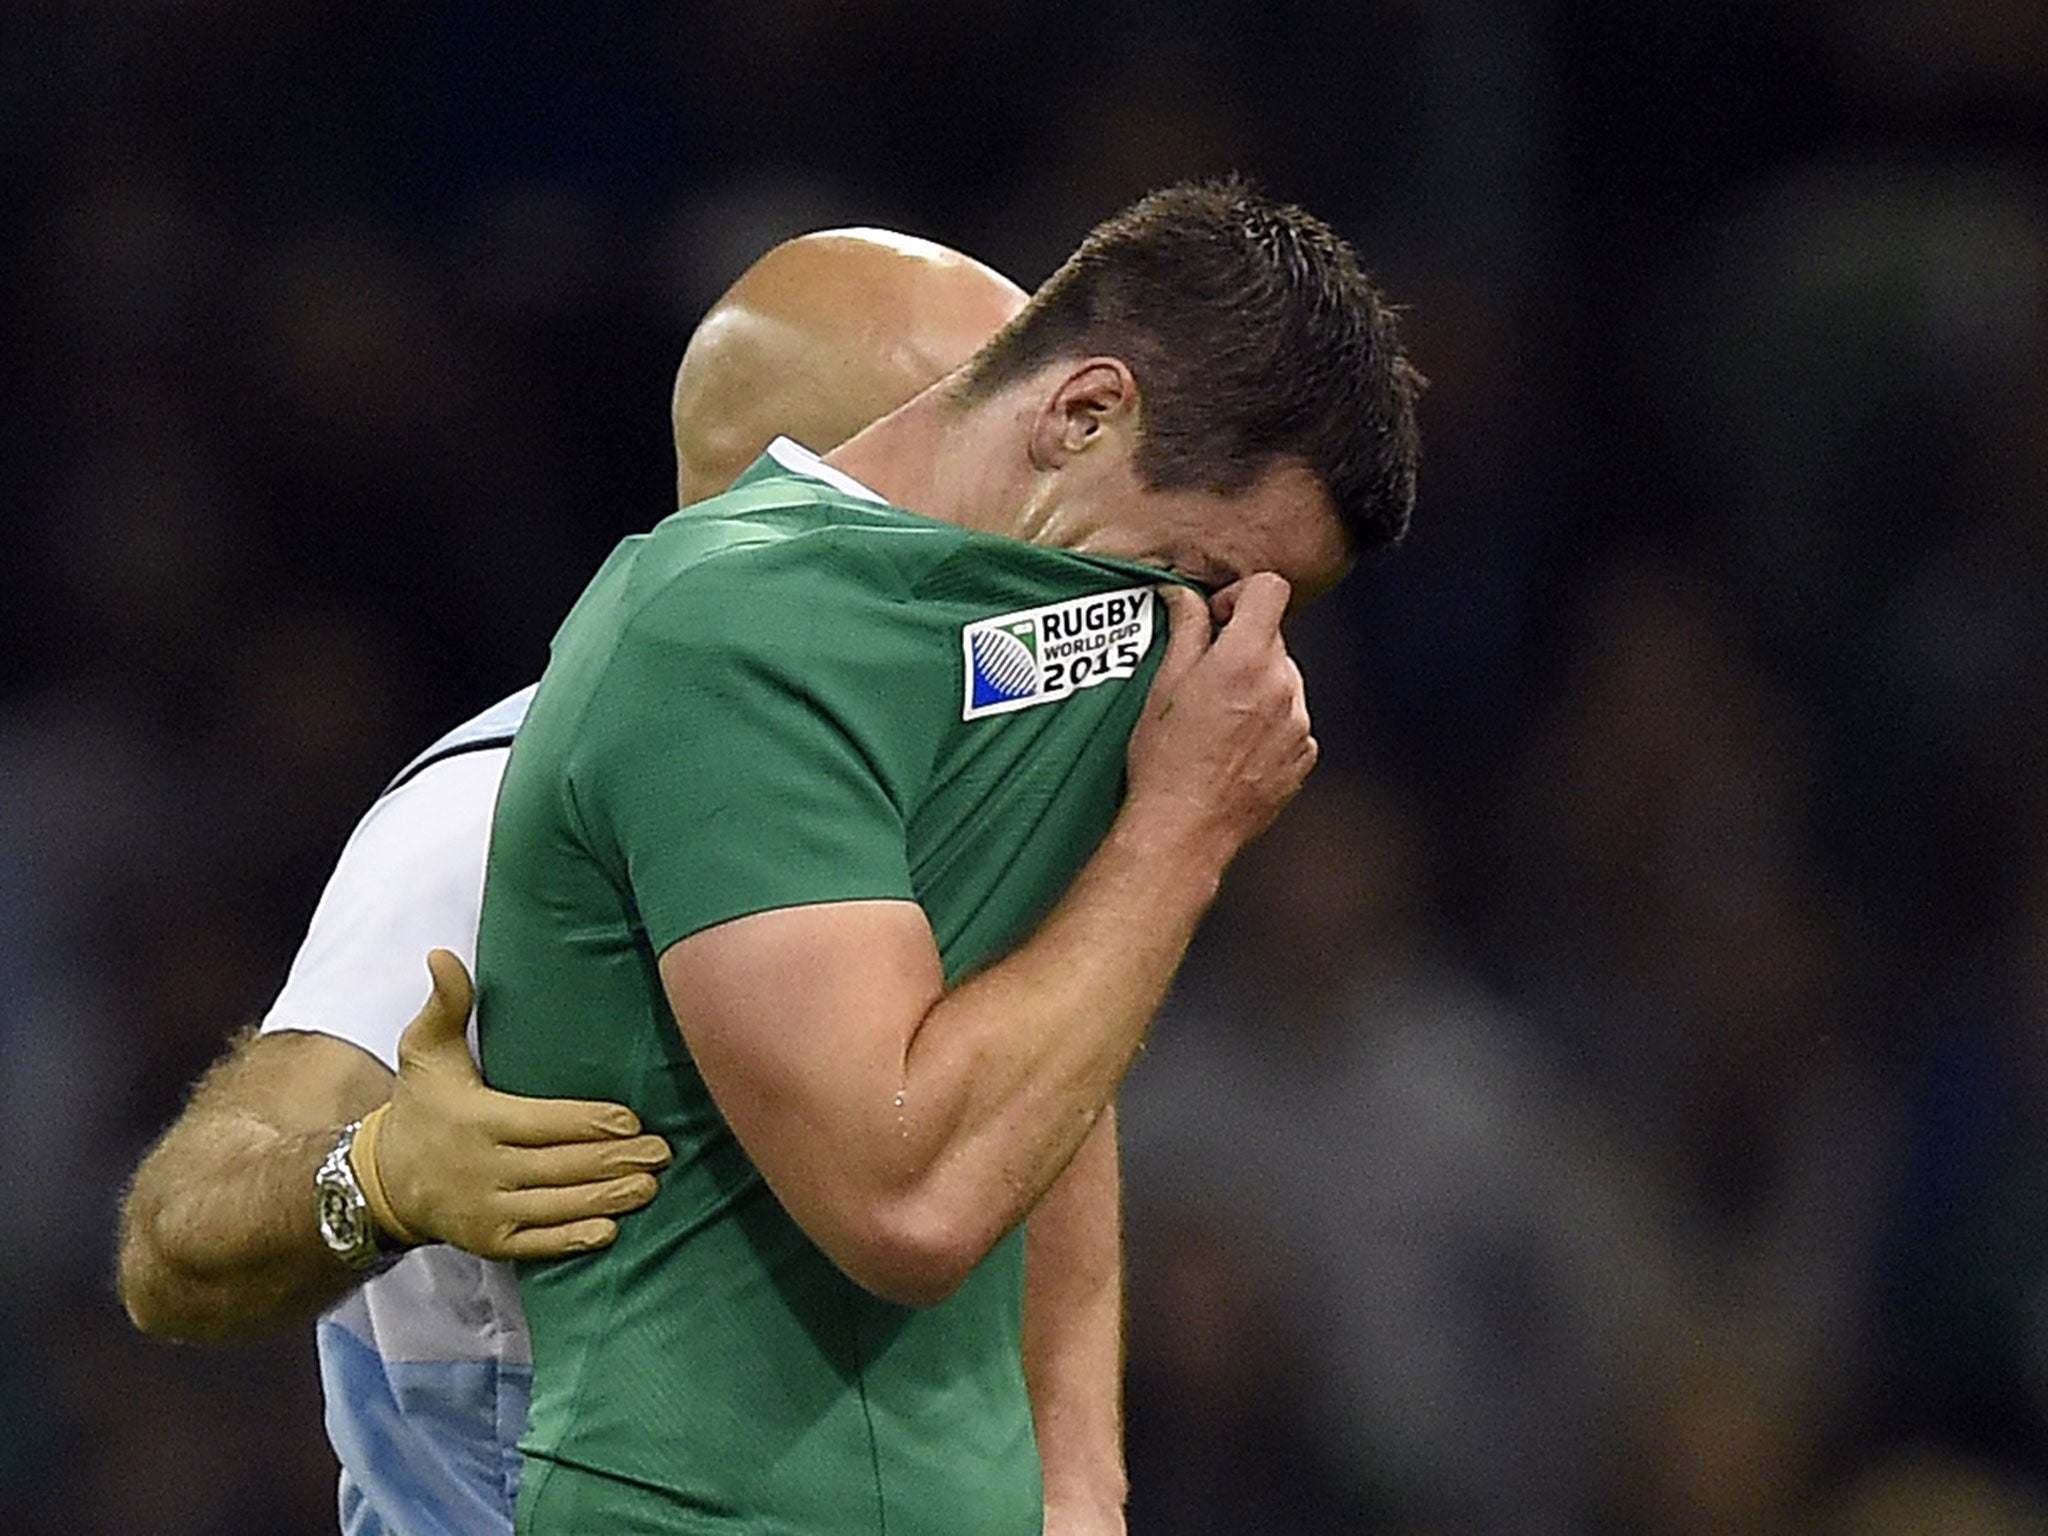 Jonathan Sexton wipes away tears as he leaves the field during Ireland's win over France